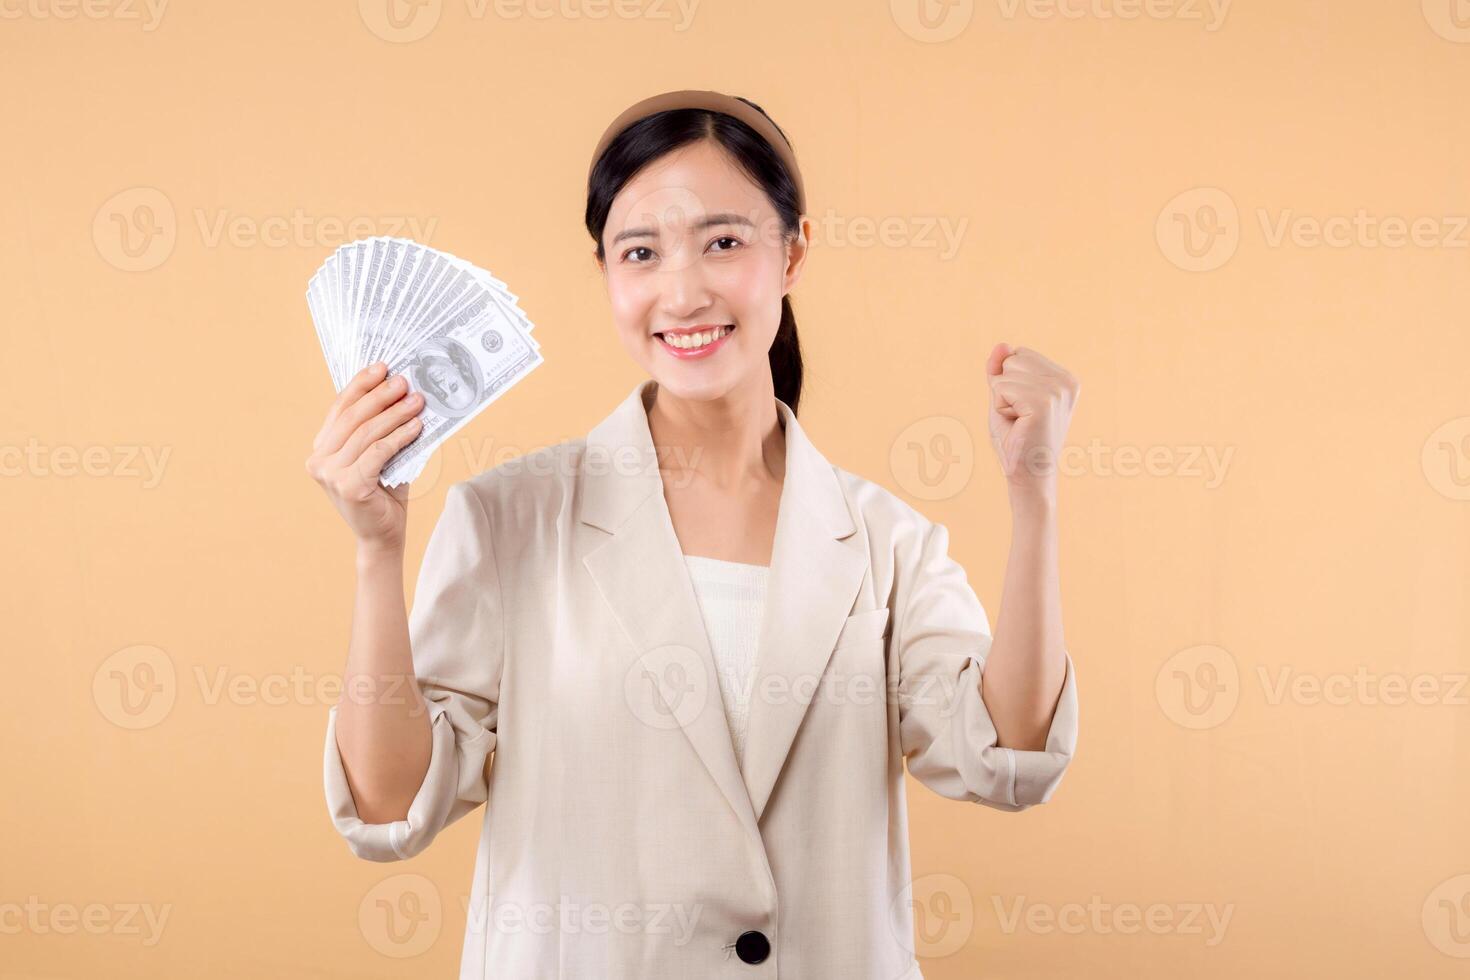 portrait of happy successful confident young asian business woman wearing white jacket holding cash money dollars standing over beige background. millionaire business, shopping concept. photo